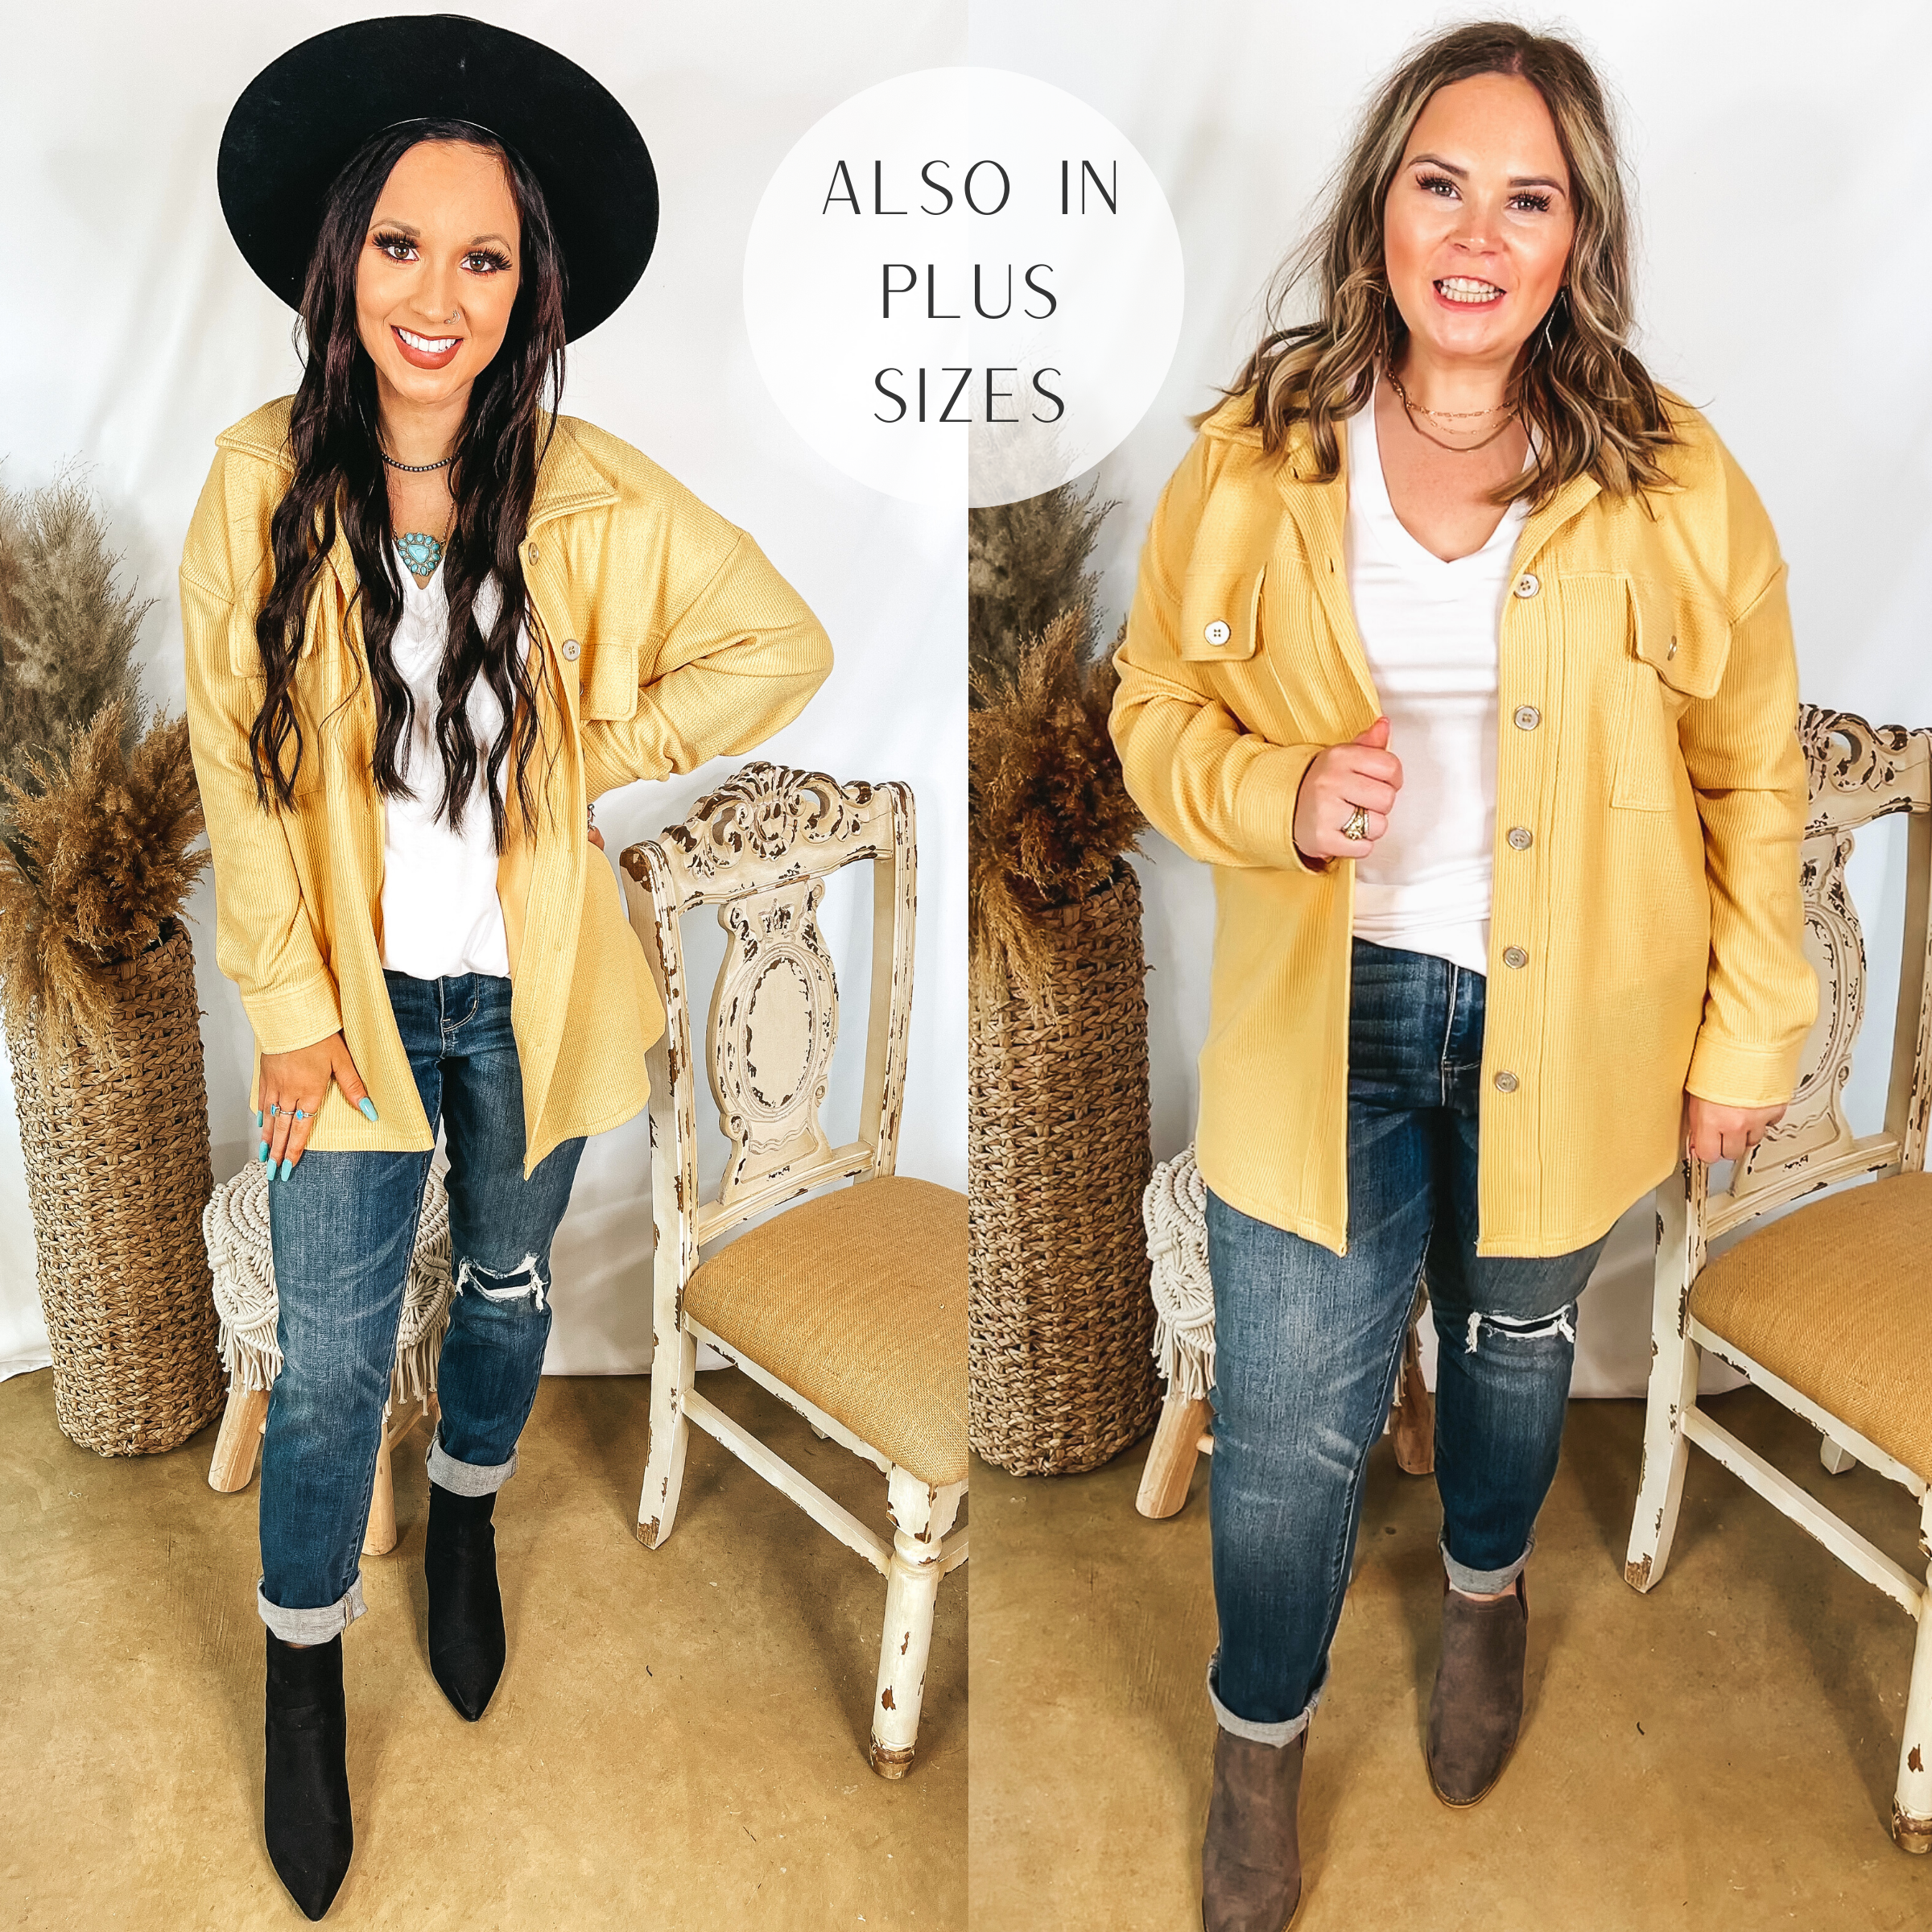 Models are wearing a yellow button up shacket. Models have it paired with a white tee, dark wash jeans, and booties.